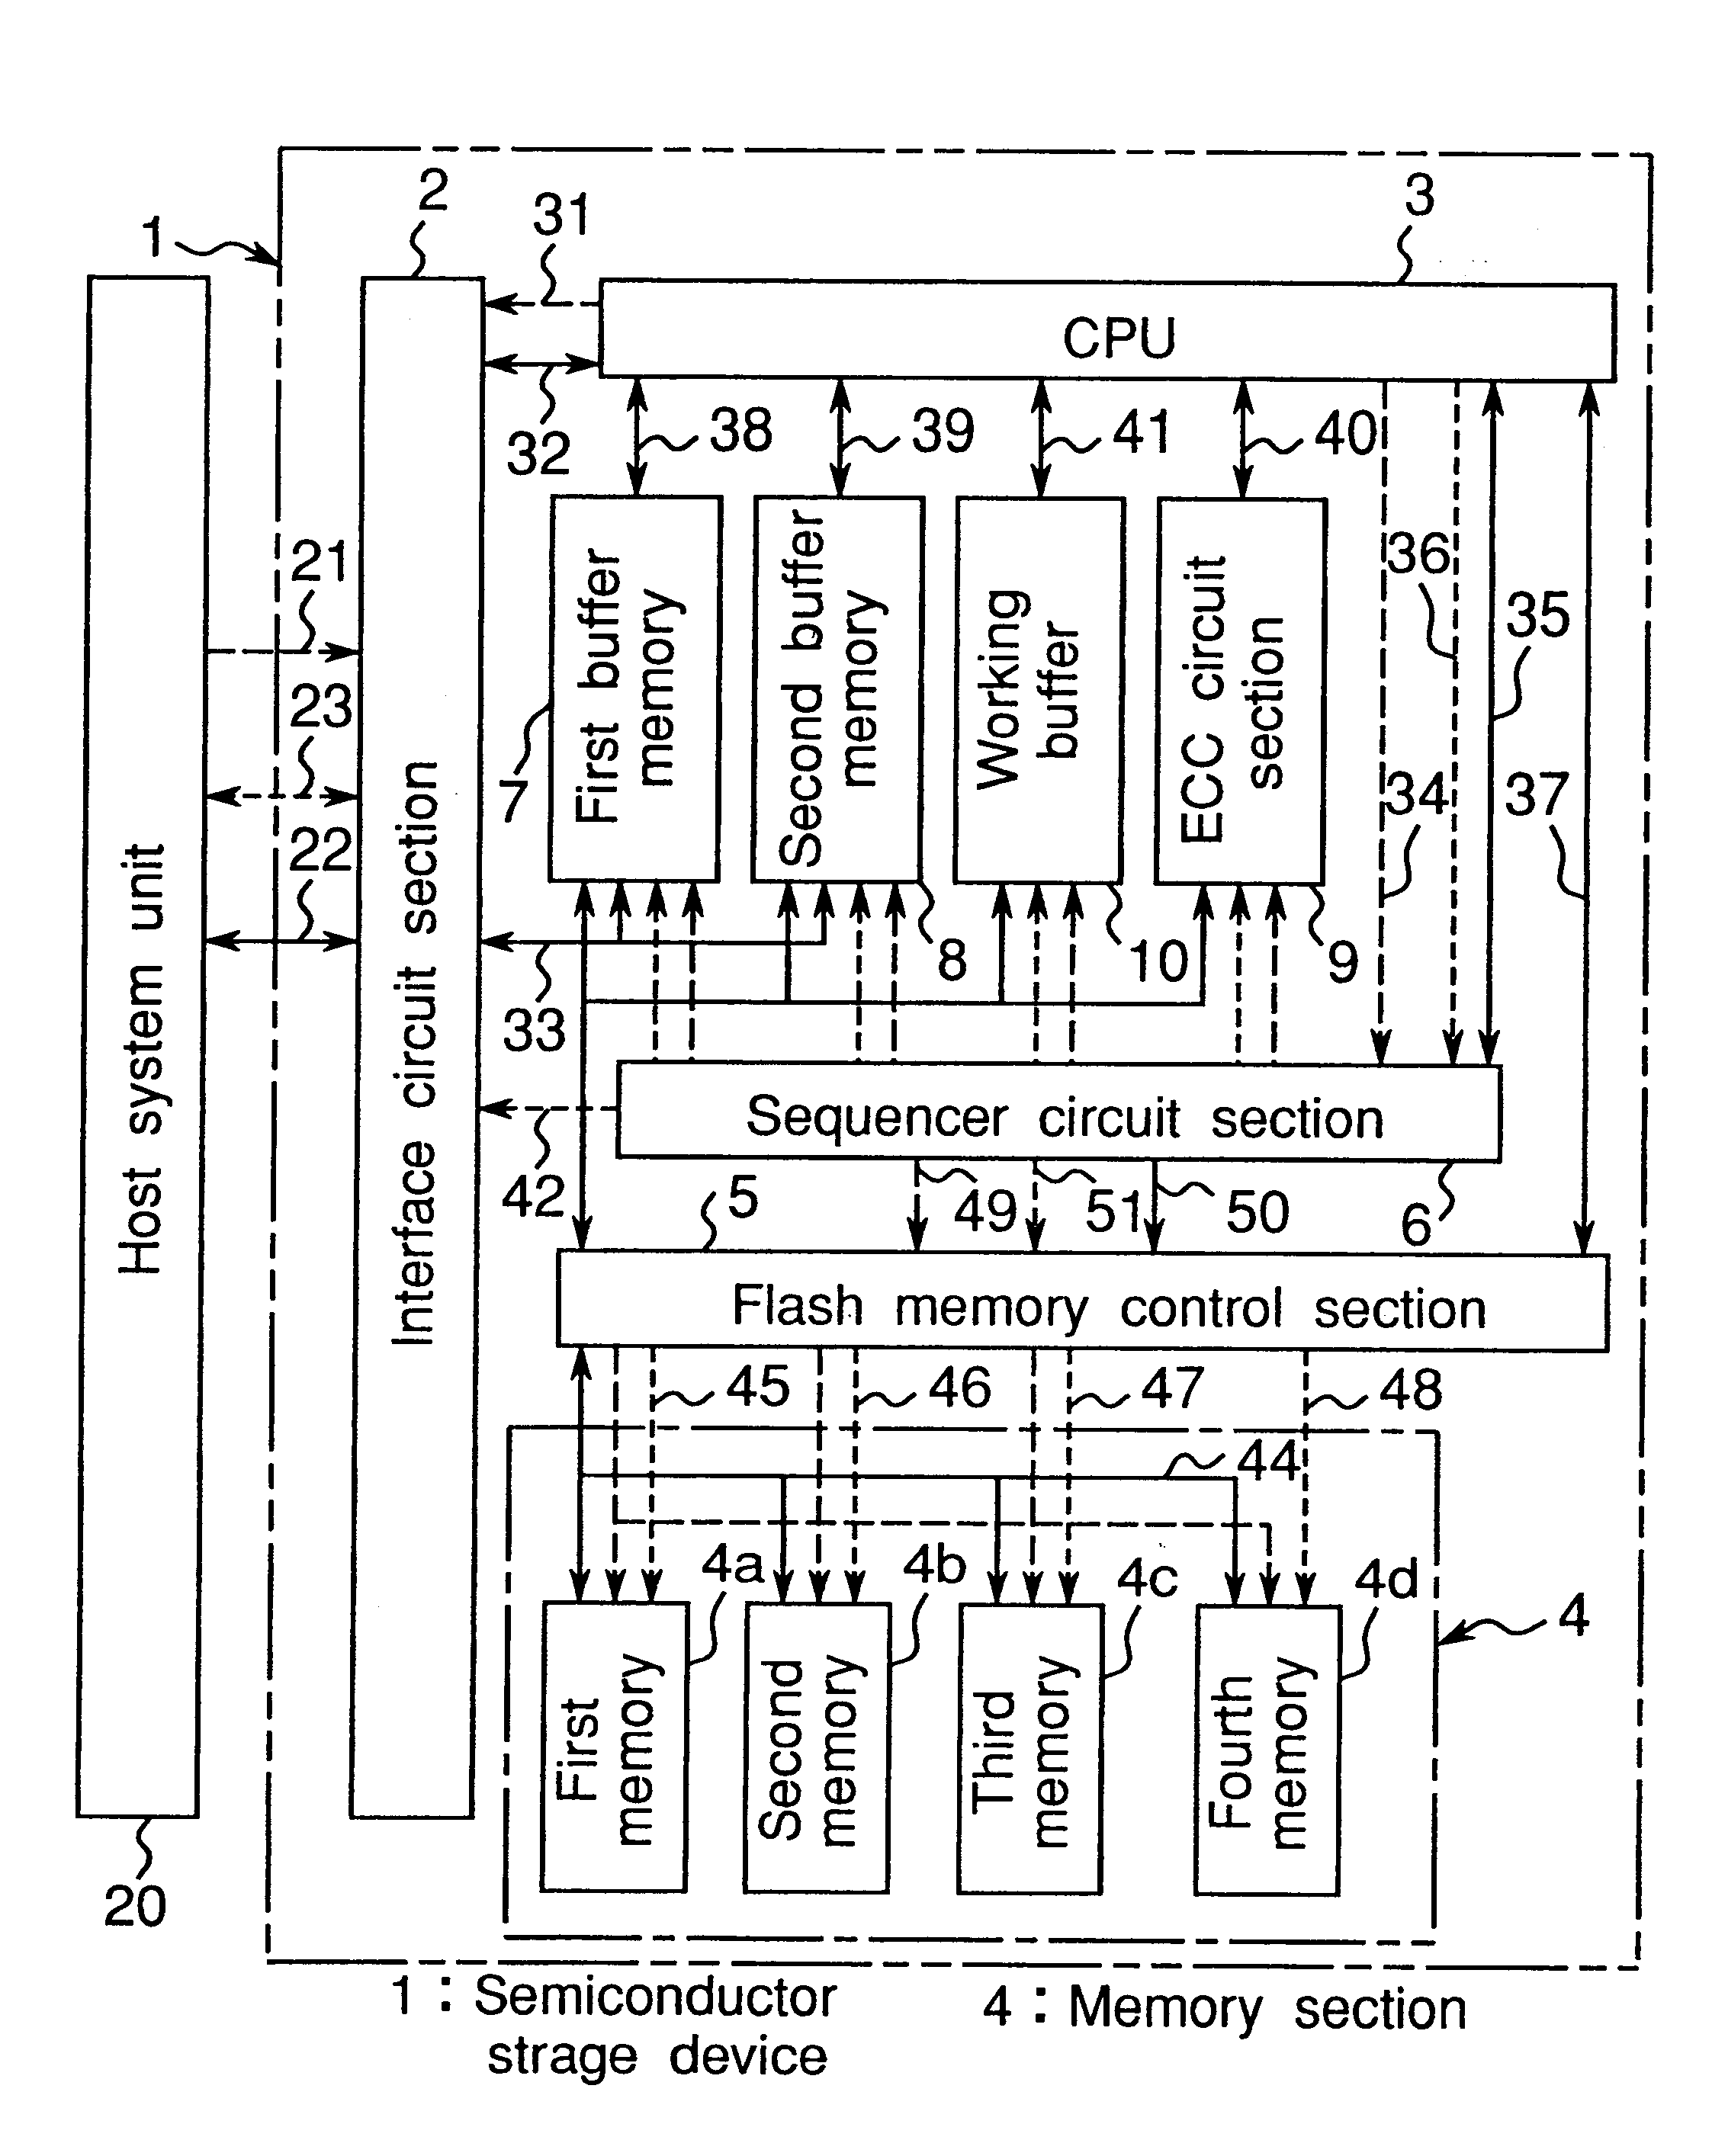 Block-erase type semiconductor storage device with independent memory groups having sequential logical addresses